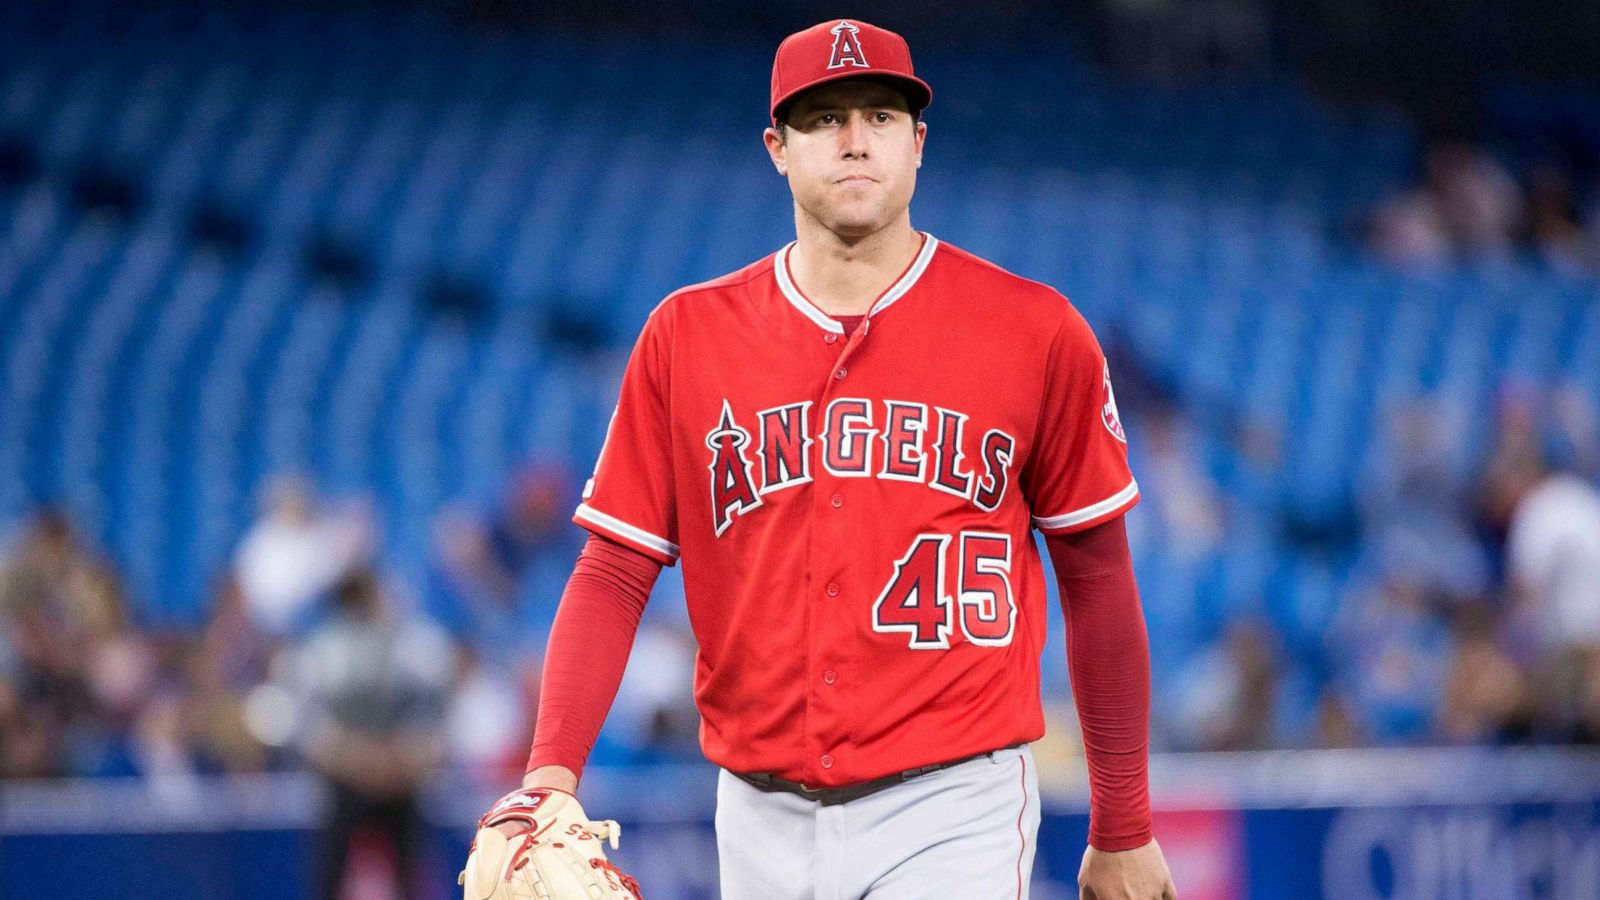 Los Angeles Angels pitcher Tyler Skaggs dead at 27; found in hotel room